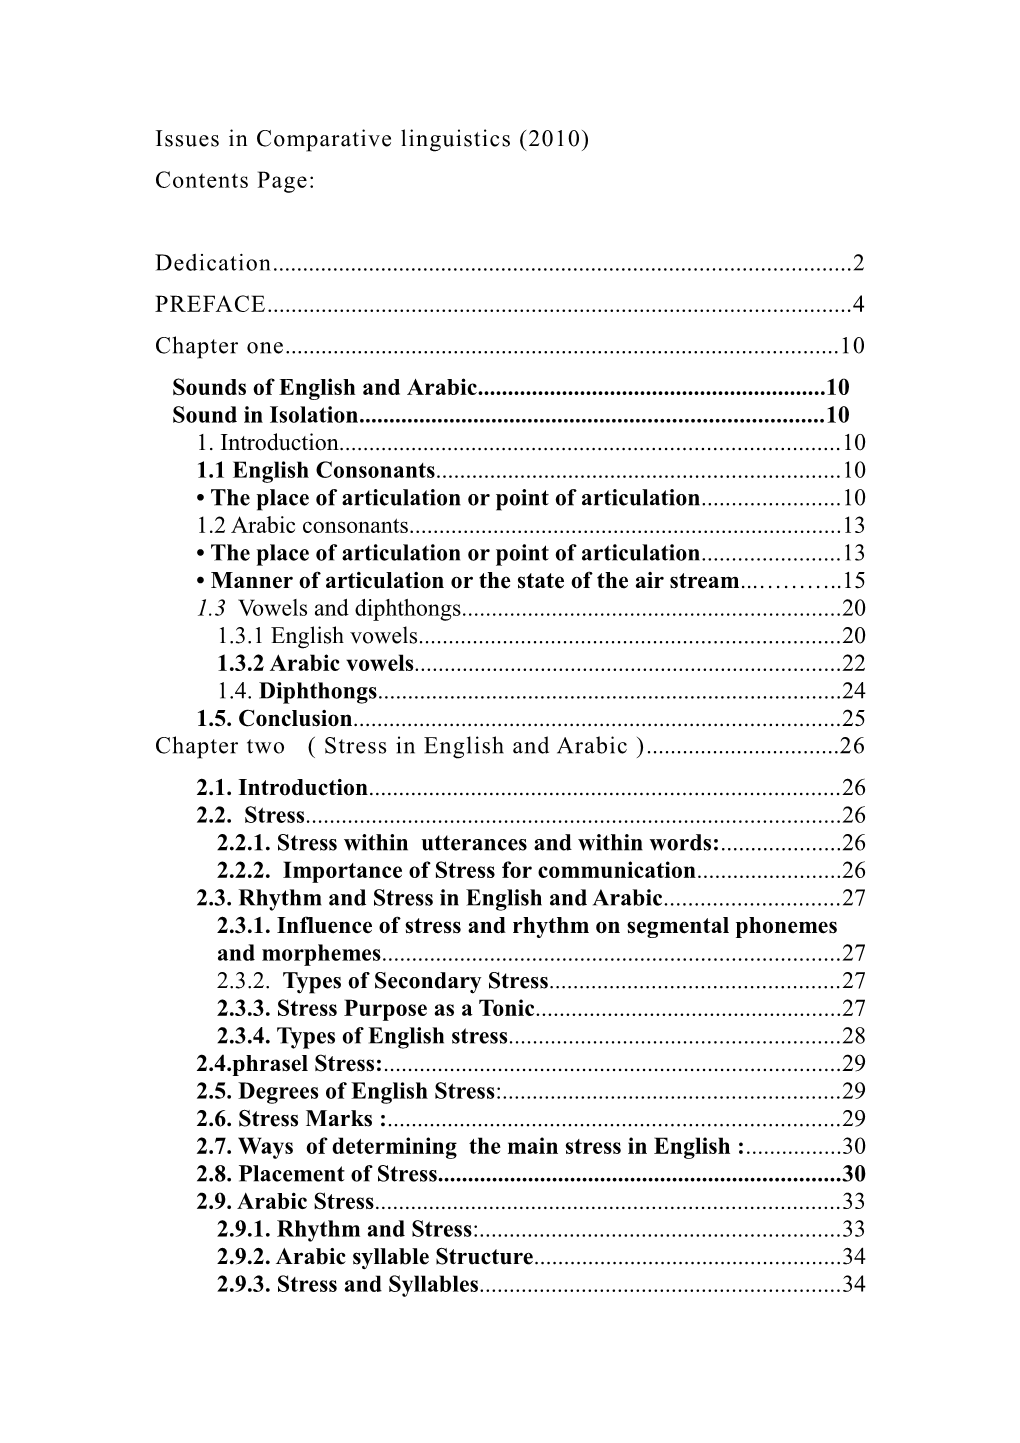 Issues in Comparative Linguistics (2010)